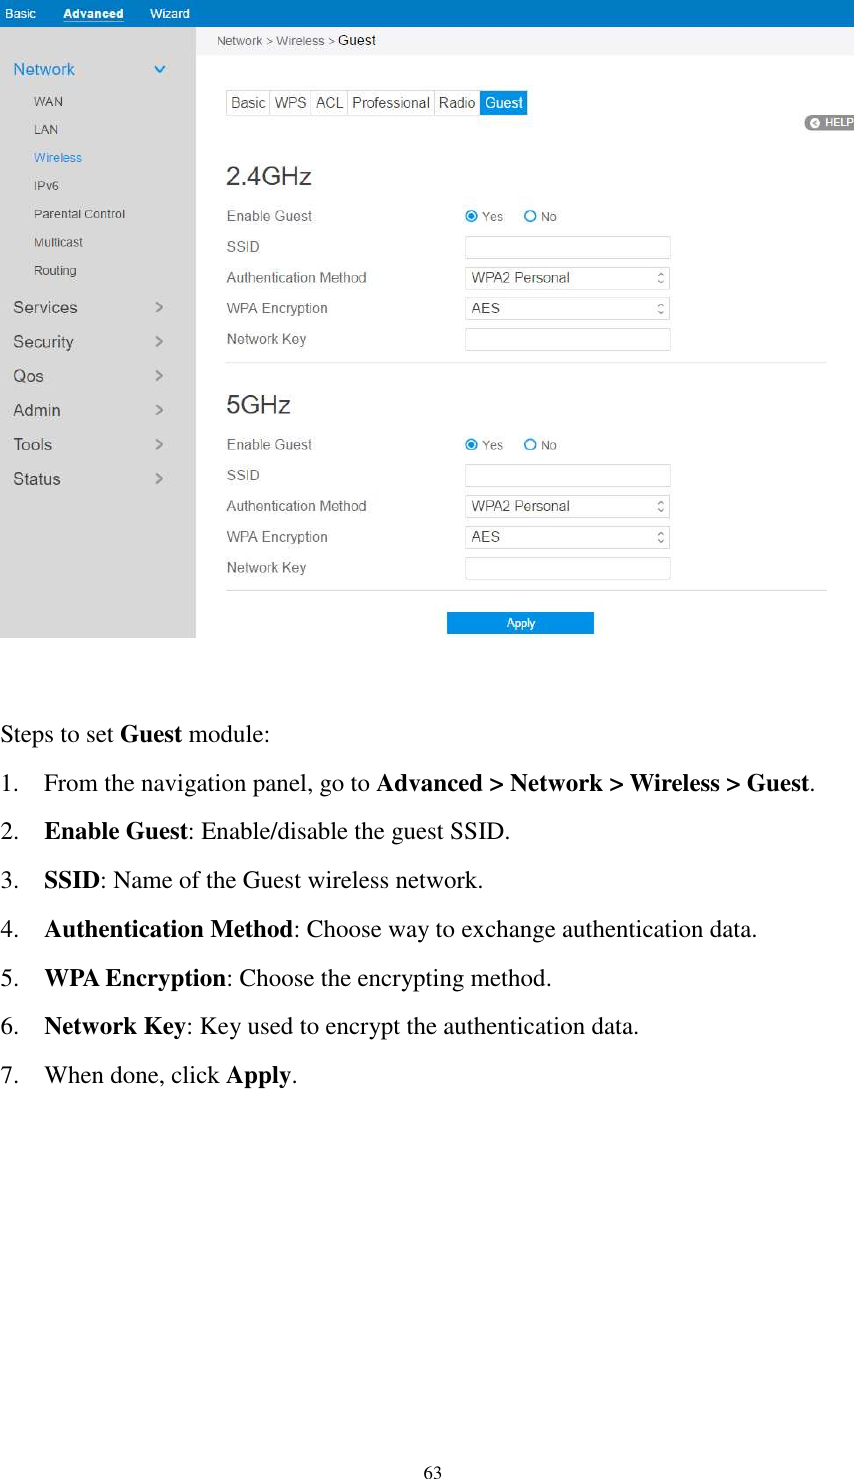  63    Steps to set Guest module:   1. From the navigation panel, go to Advanced &gt; Network &gt; Wireless &gt; Guest. 2. Enable Guest: Enable/disable the guest SSID. 3. SSID: Name of the Guest wireless network. 4. Authentication Method: Choose way to exchange authentication data.   5. WPA Encryption: Choose the encrypting method. 6. Network Key: Key used to encrypt the authentication data.   7. When done, click Apply.  